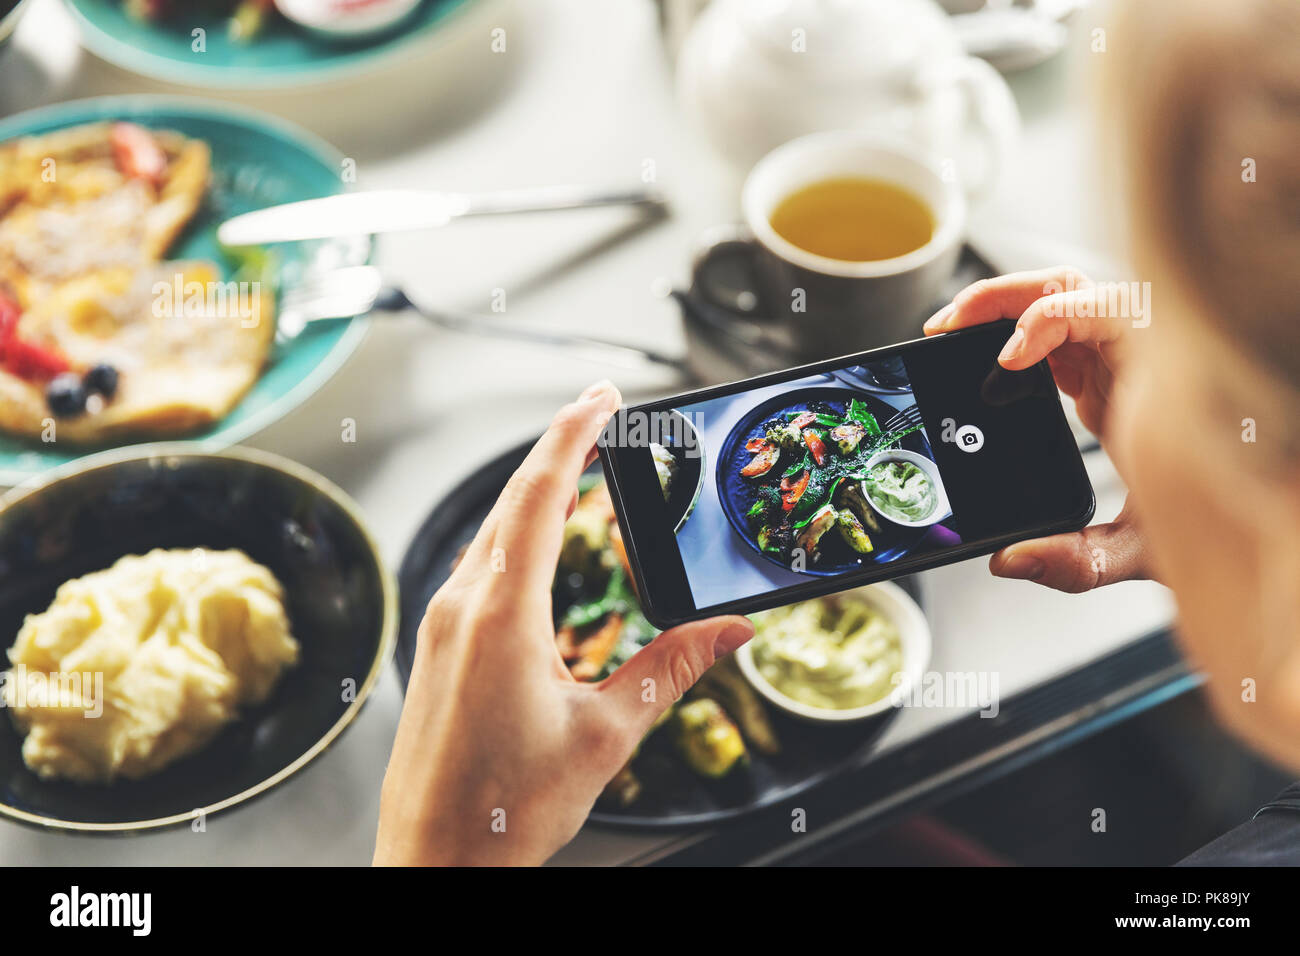 woman with smart phone taking picture of food at restaurant Stock Photo